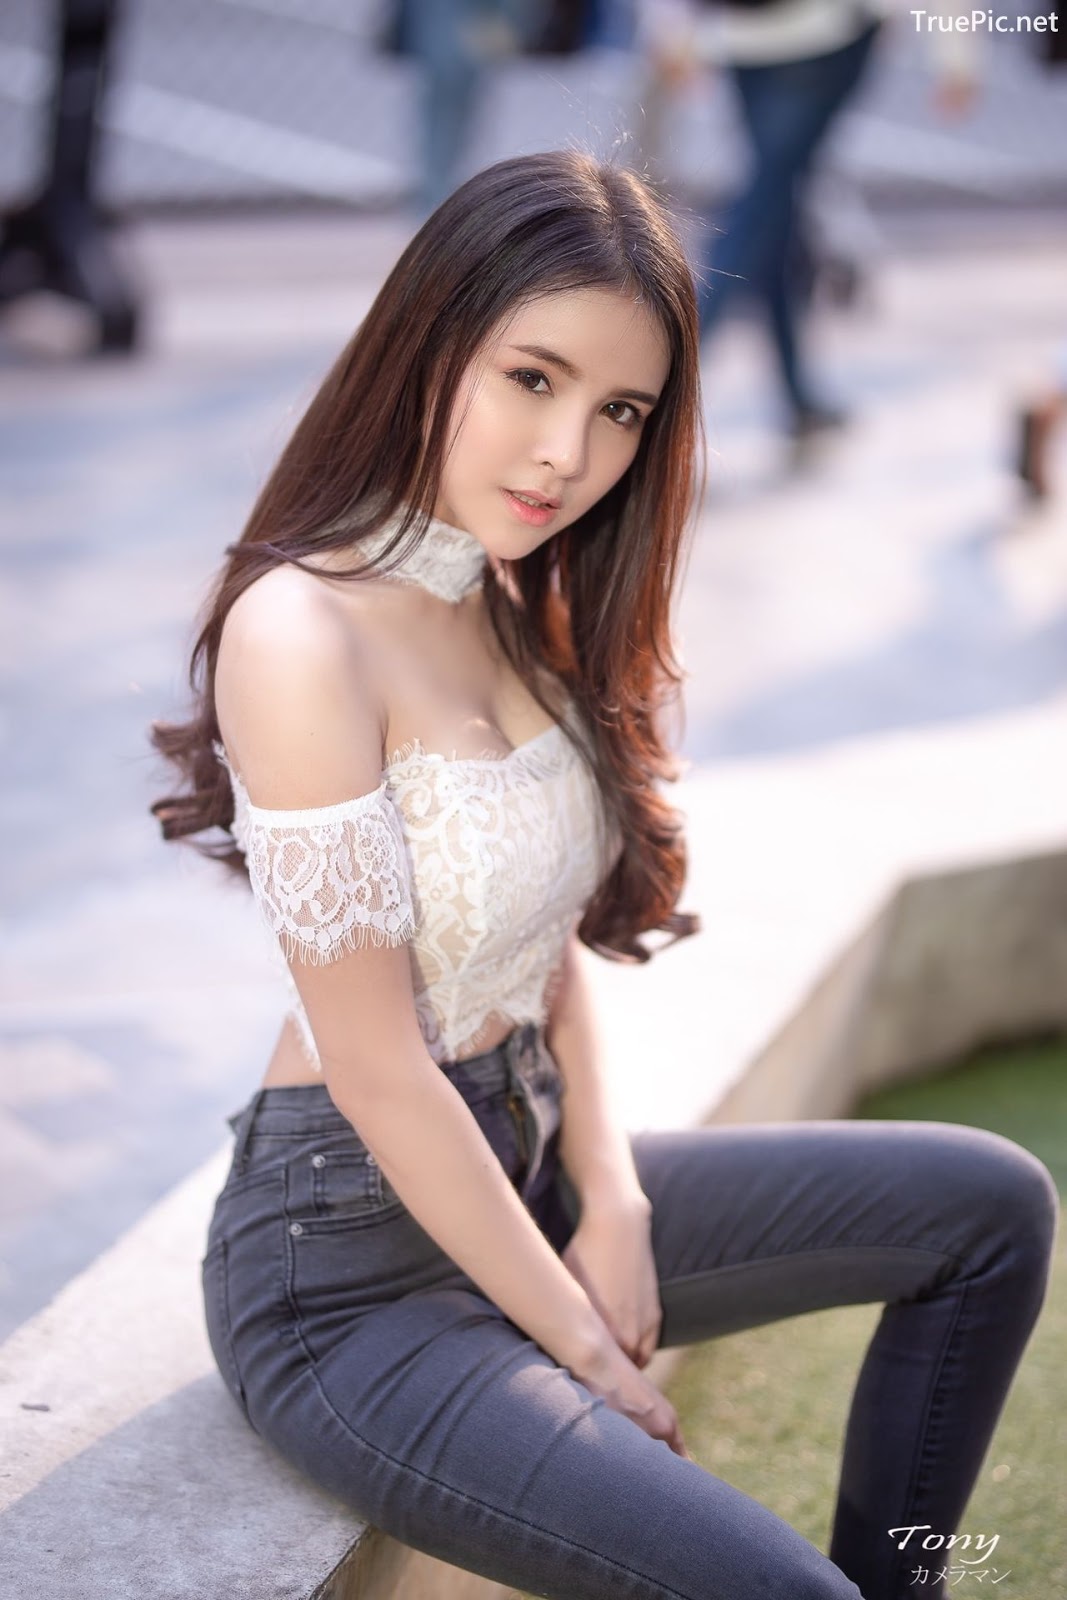 Image-Thailand-Beautiful-Model-Soithip-Palwongpaisal-Transparent-Lace-Crop-Top-And-Jean-TruePic.net- Picture-25